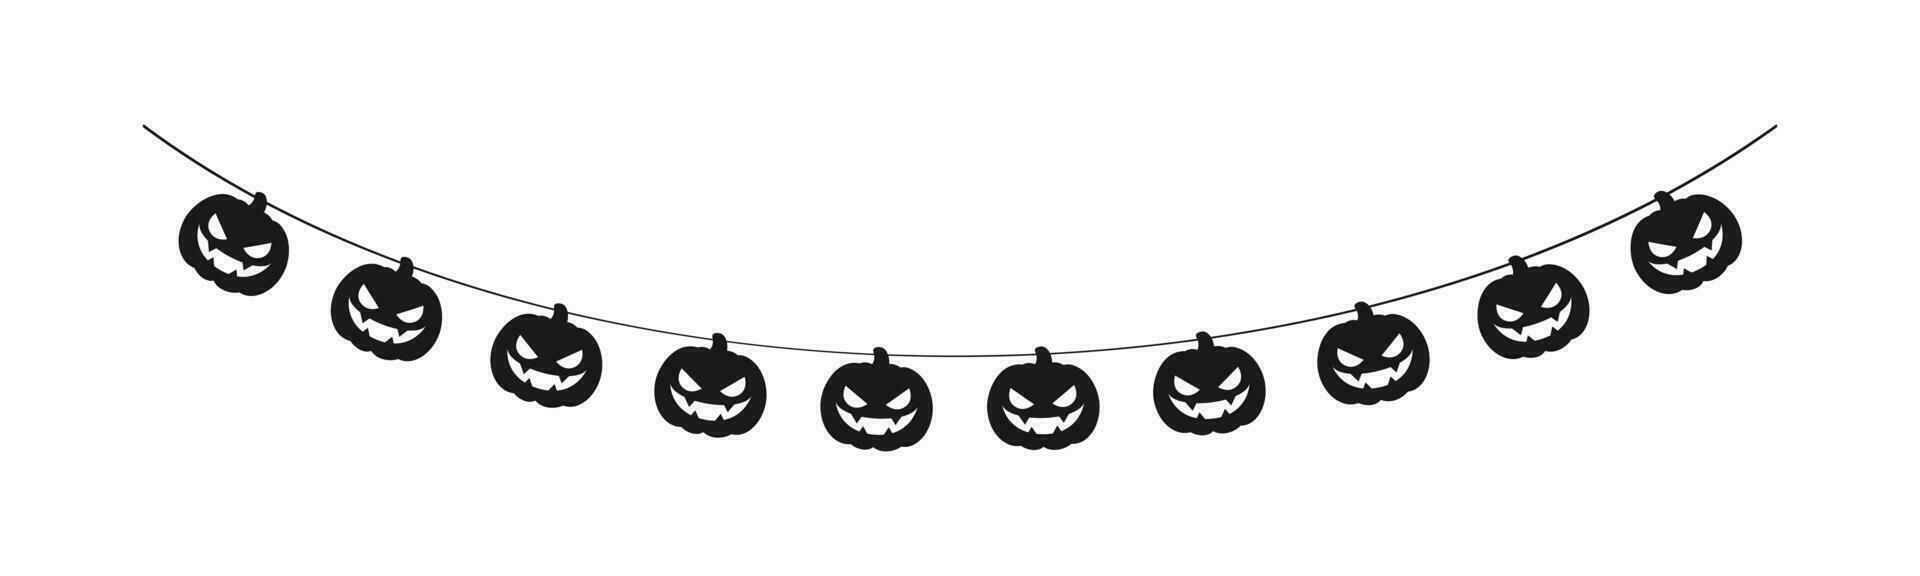 Cute Jack O Lantern Evil Pumpkin Garland Silhouette for Halloween. Simple banner hanging party classy decor vector element.